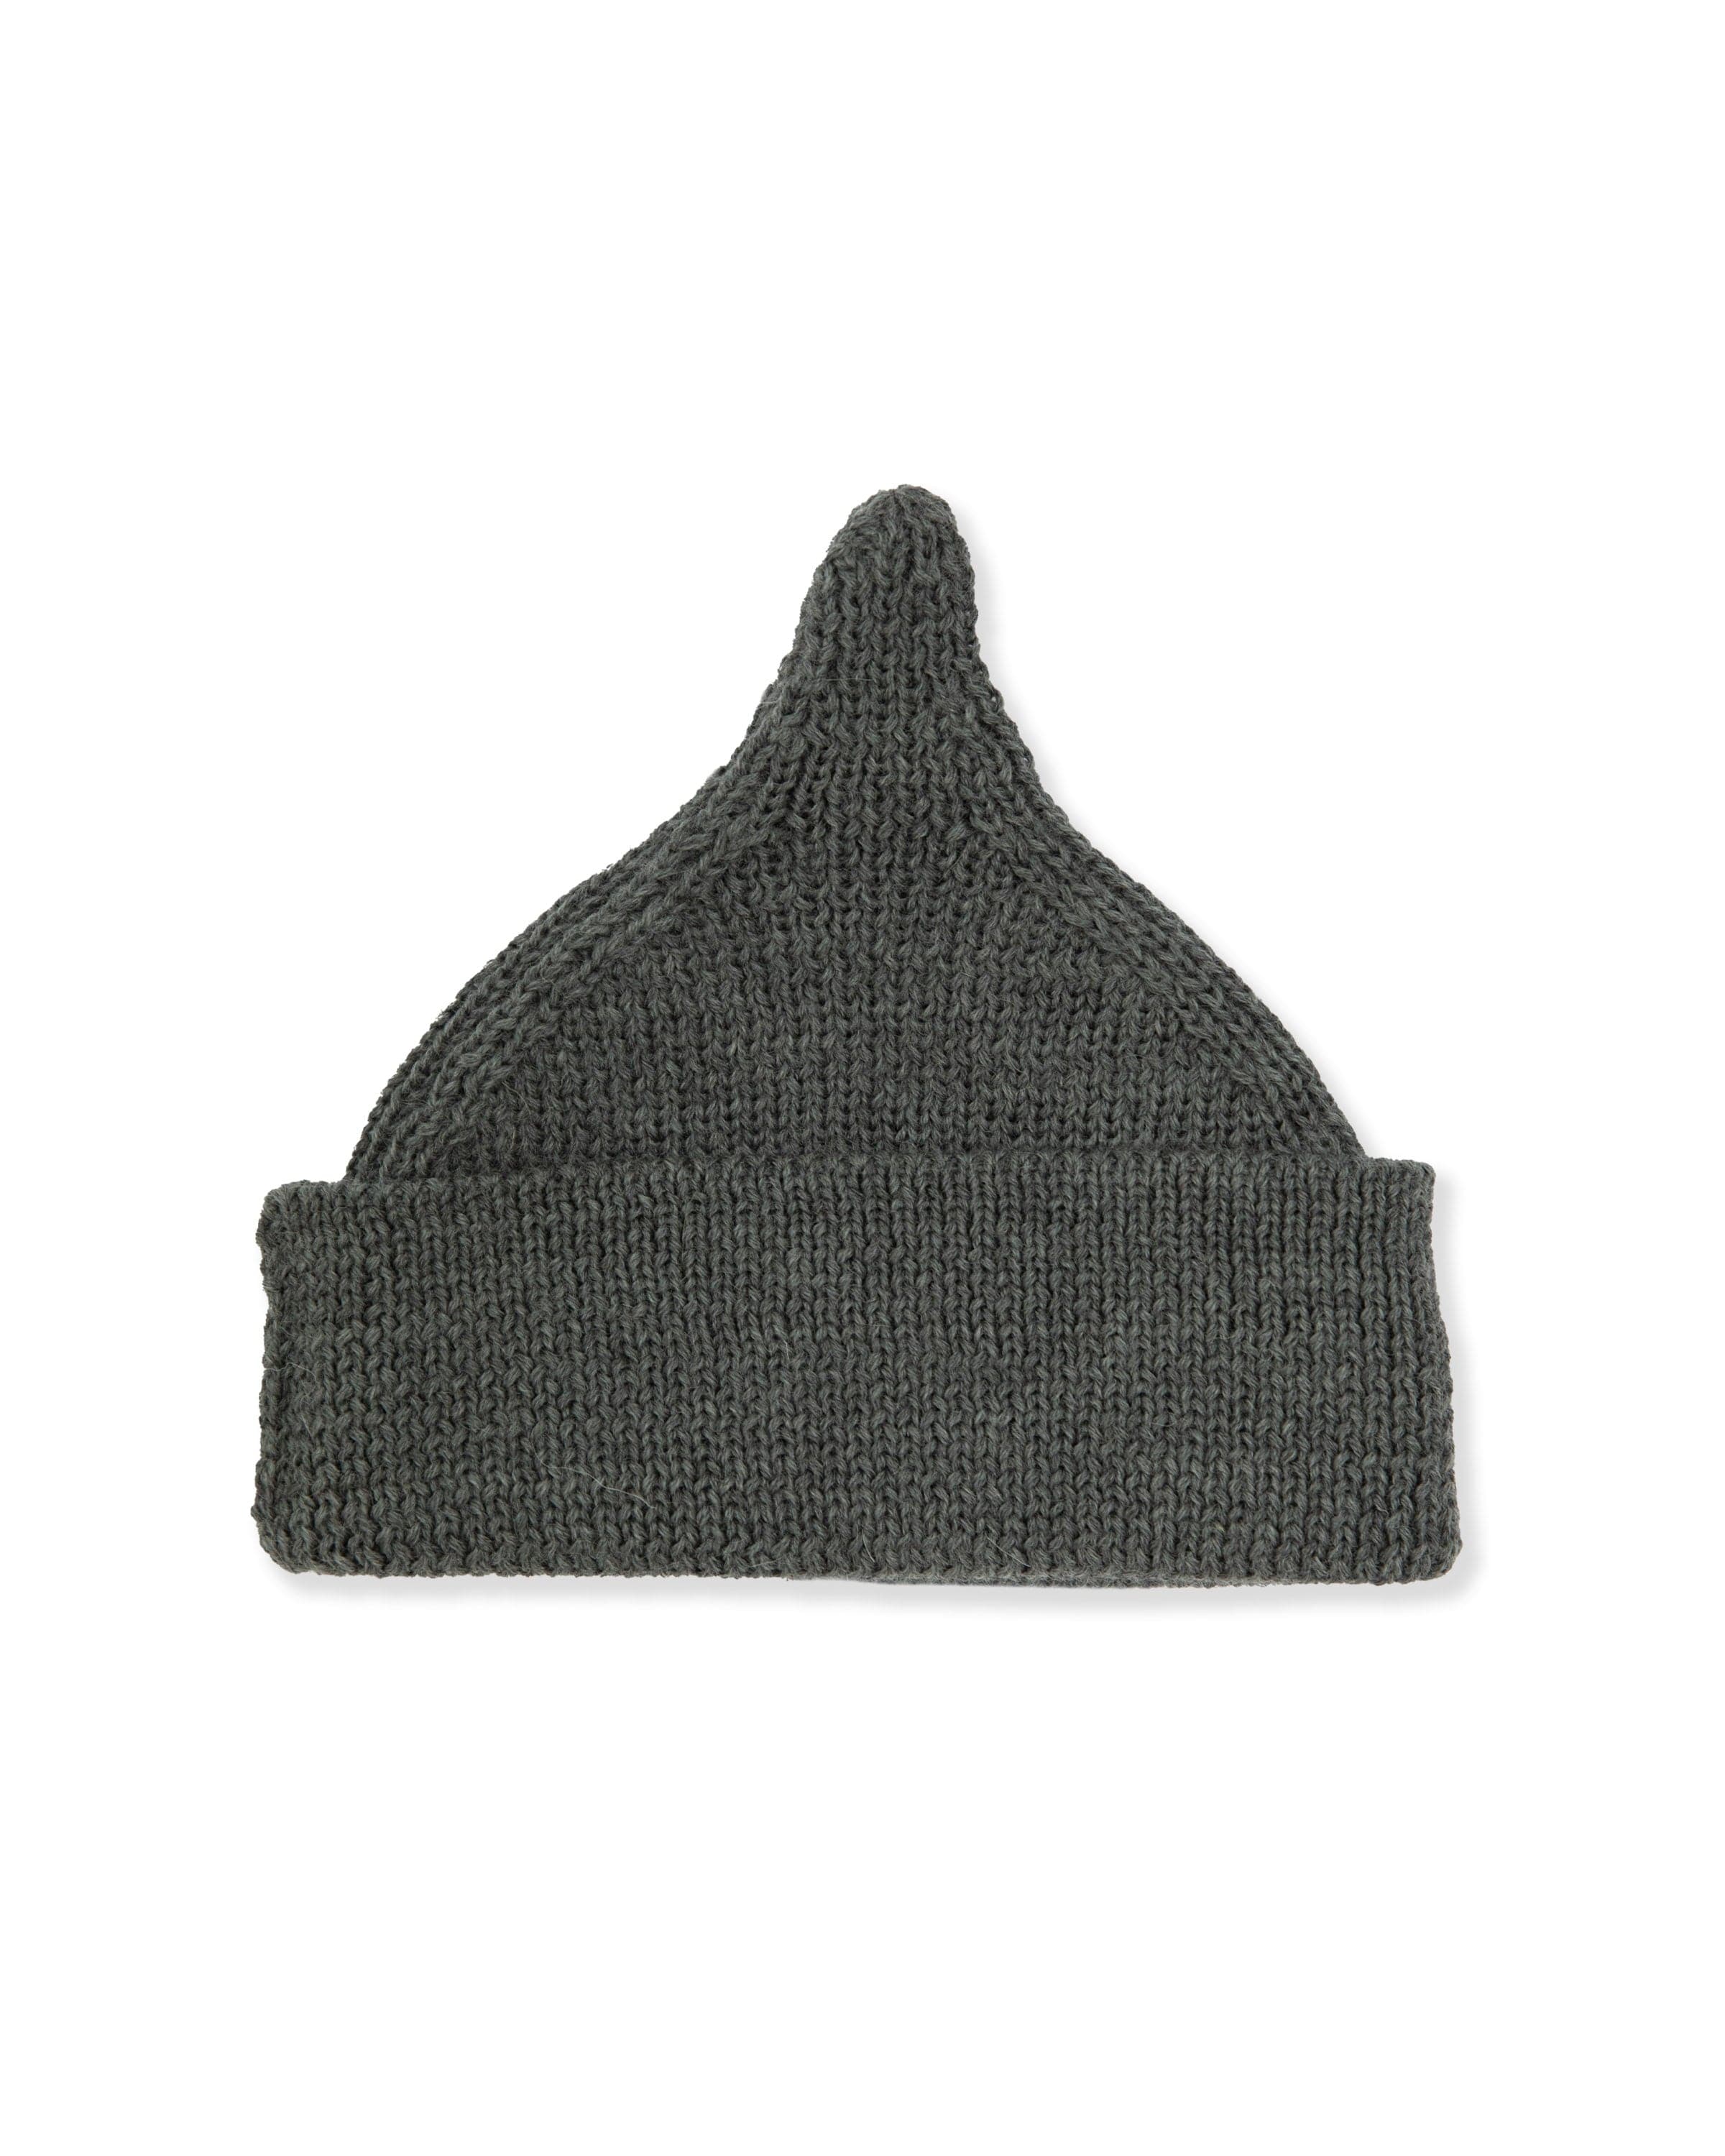 James Street Co | BABY Port Beanie - Charcoal